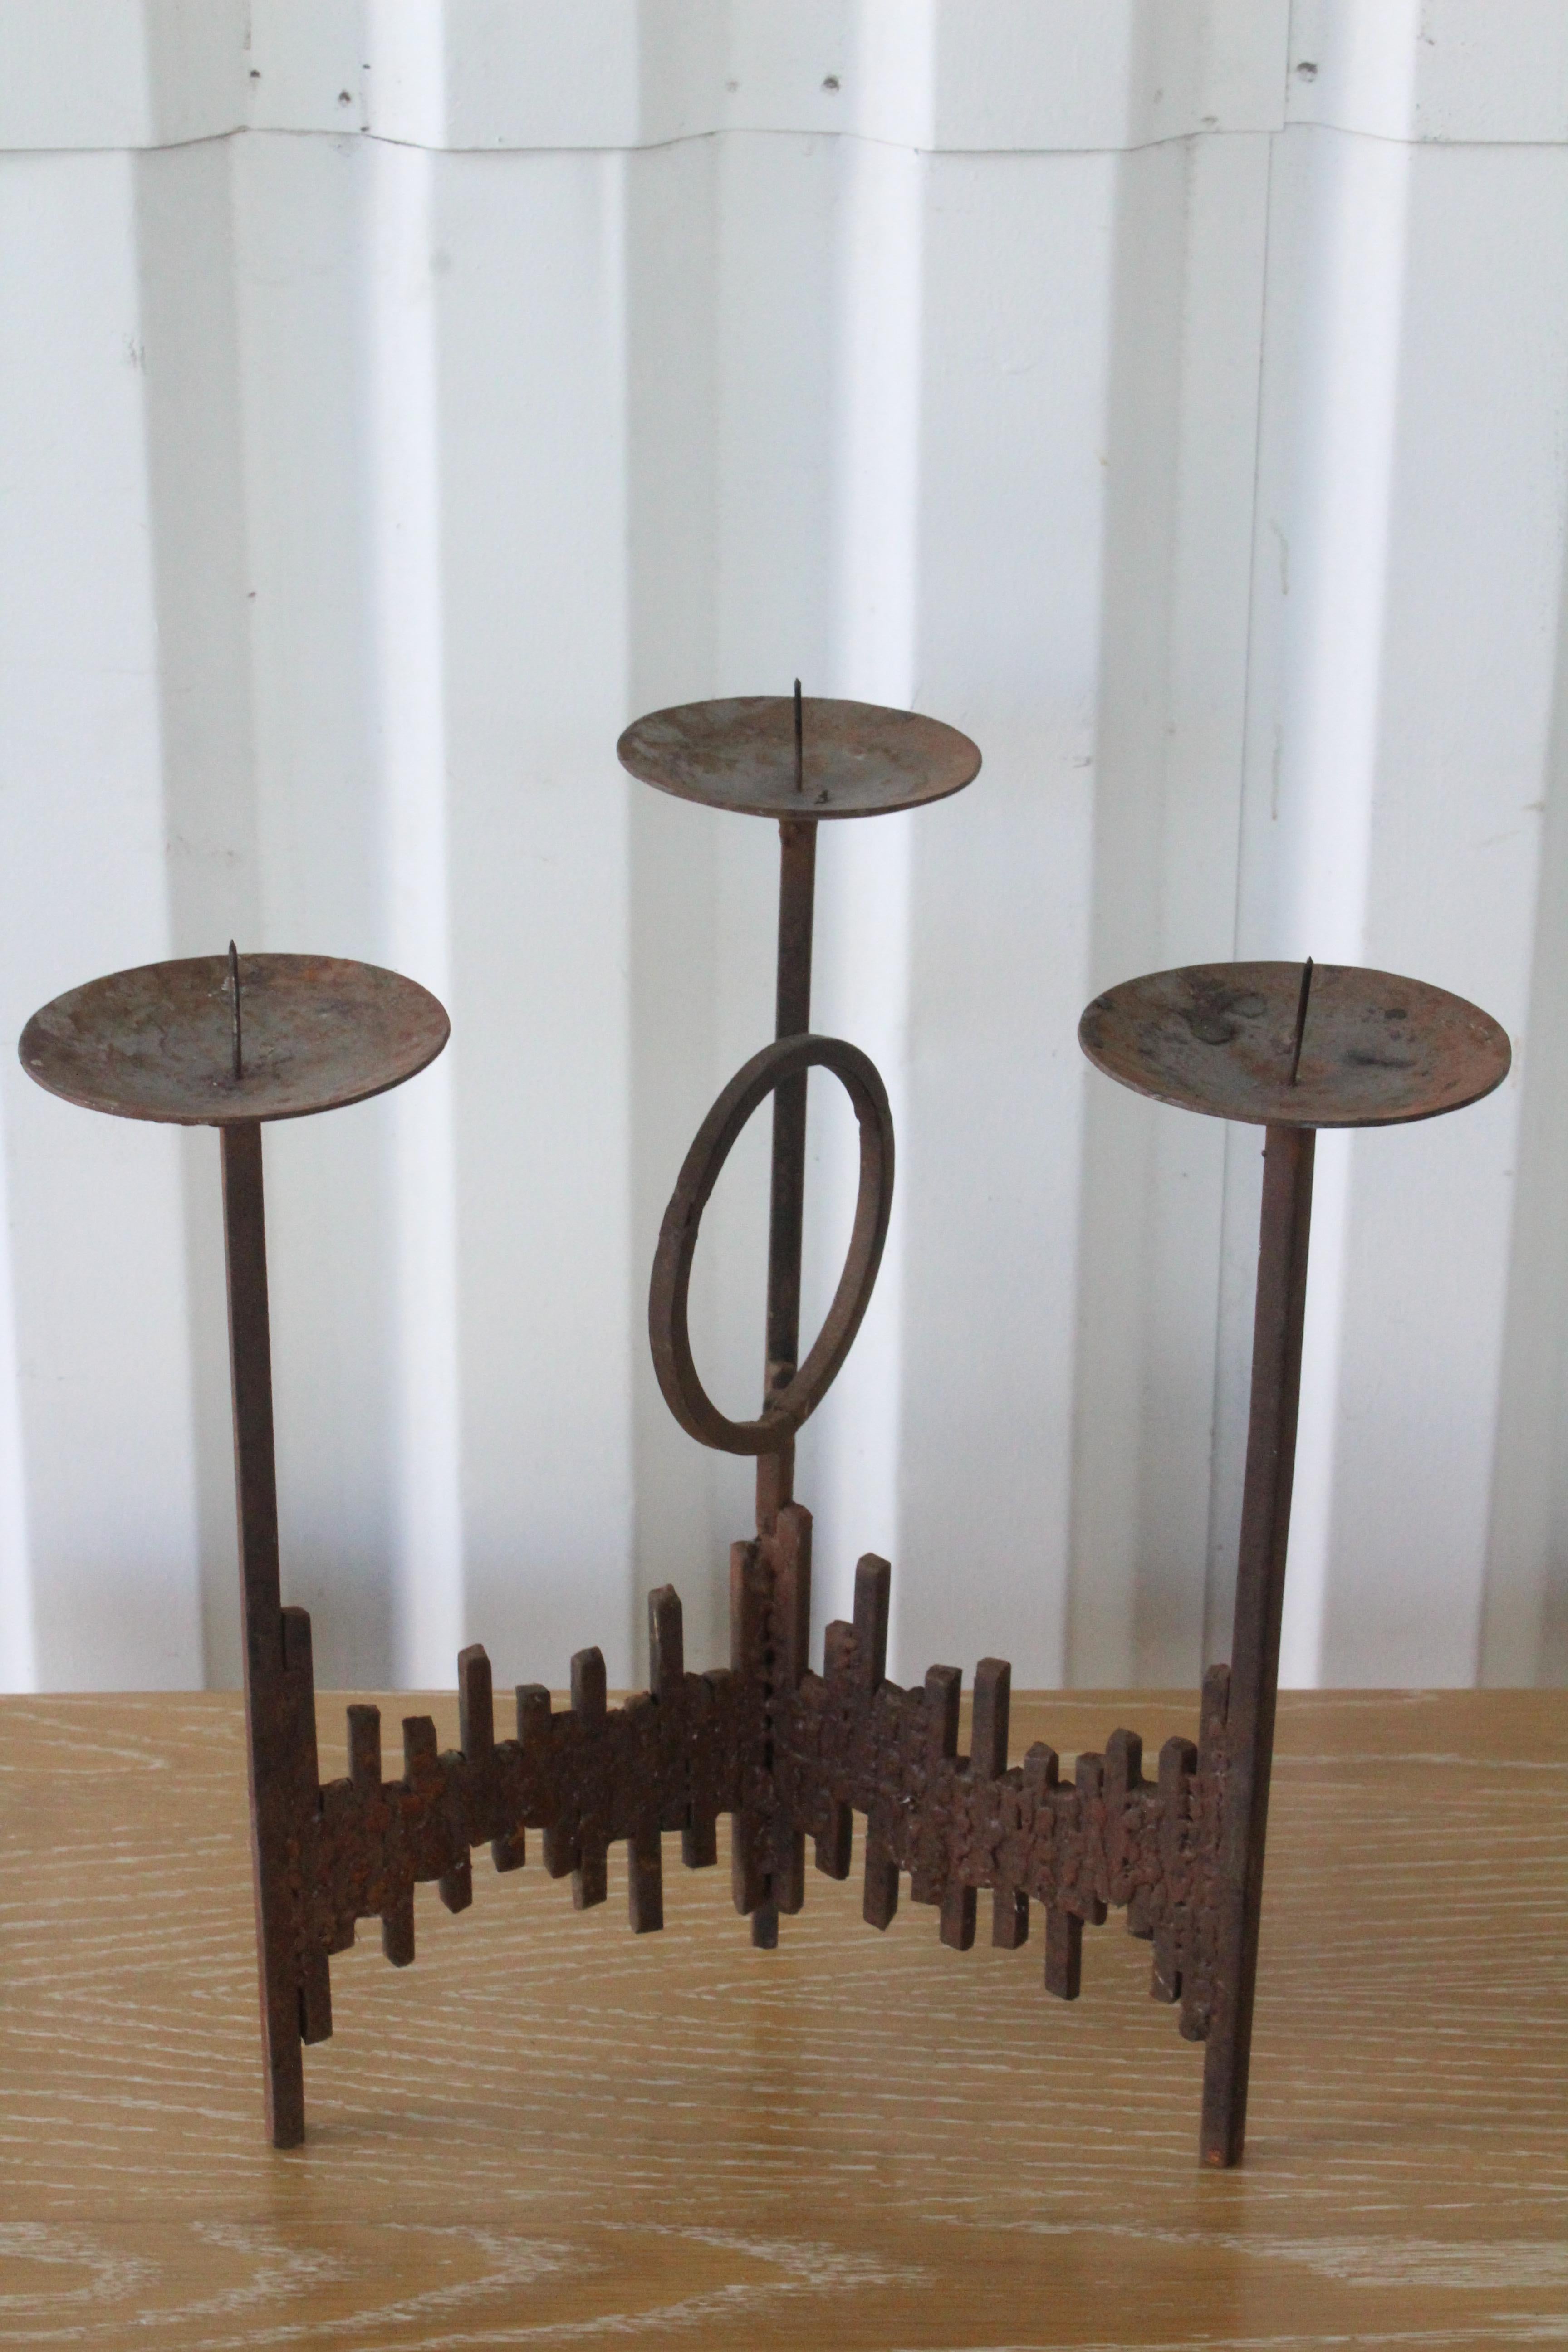 A vintage iron candelabra from France, 1960s. Original rusted patina.